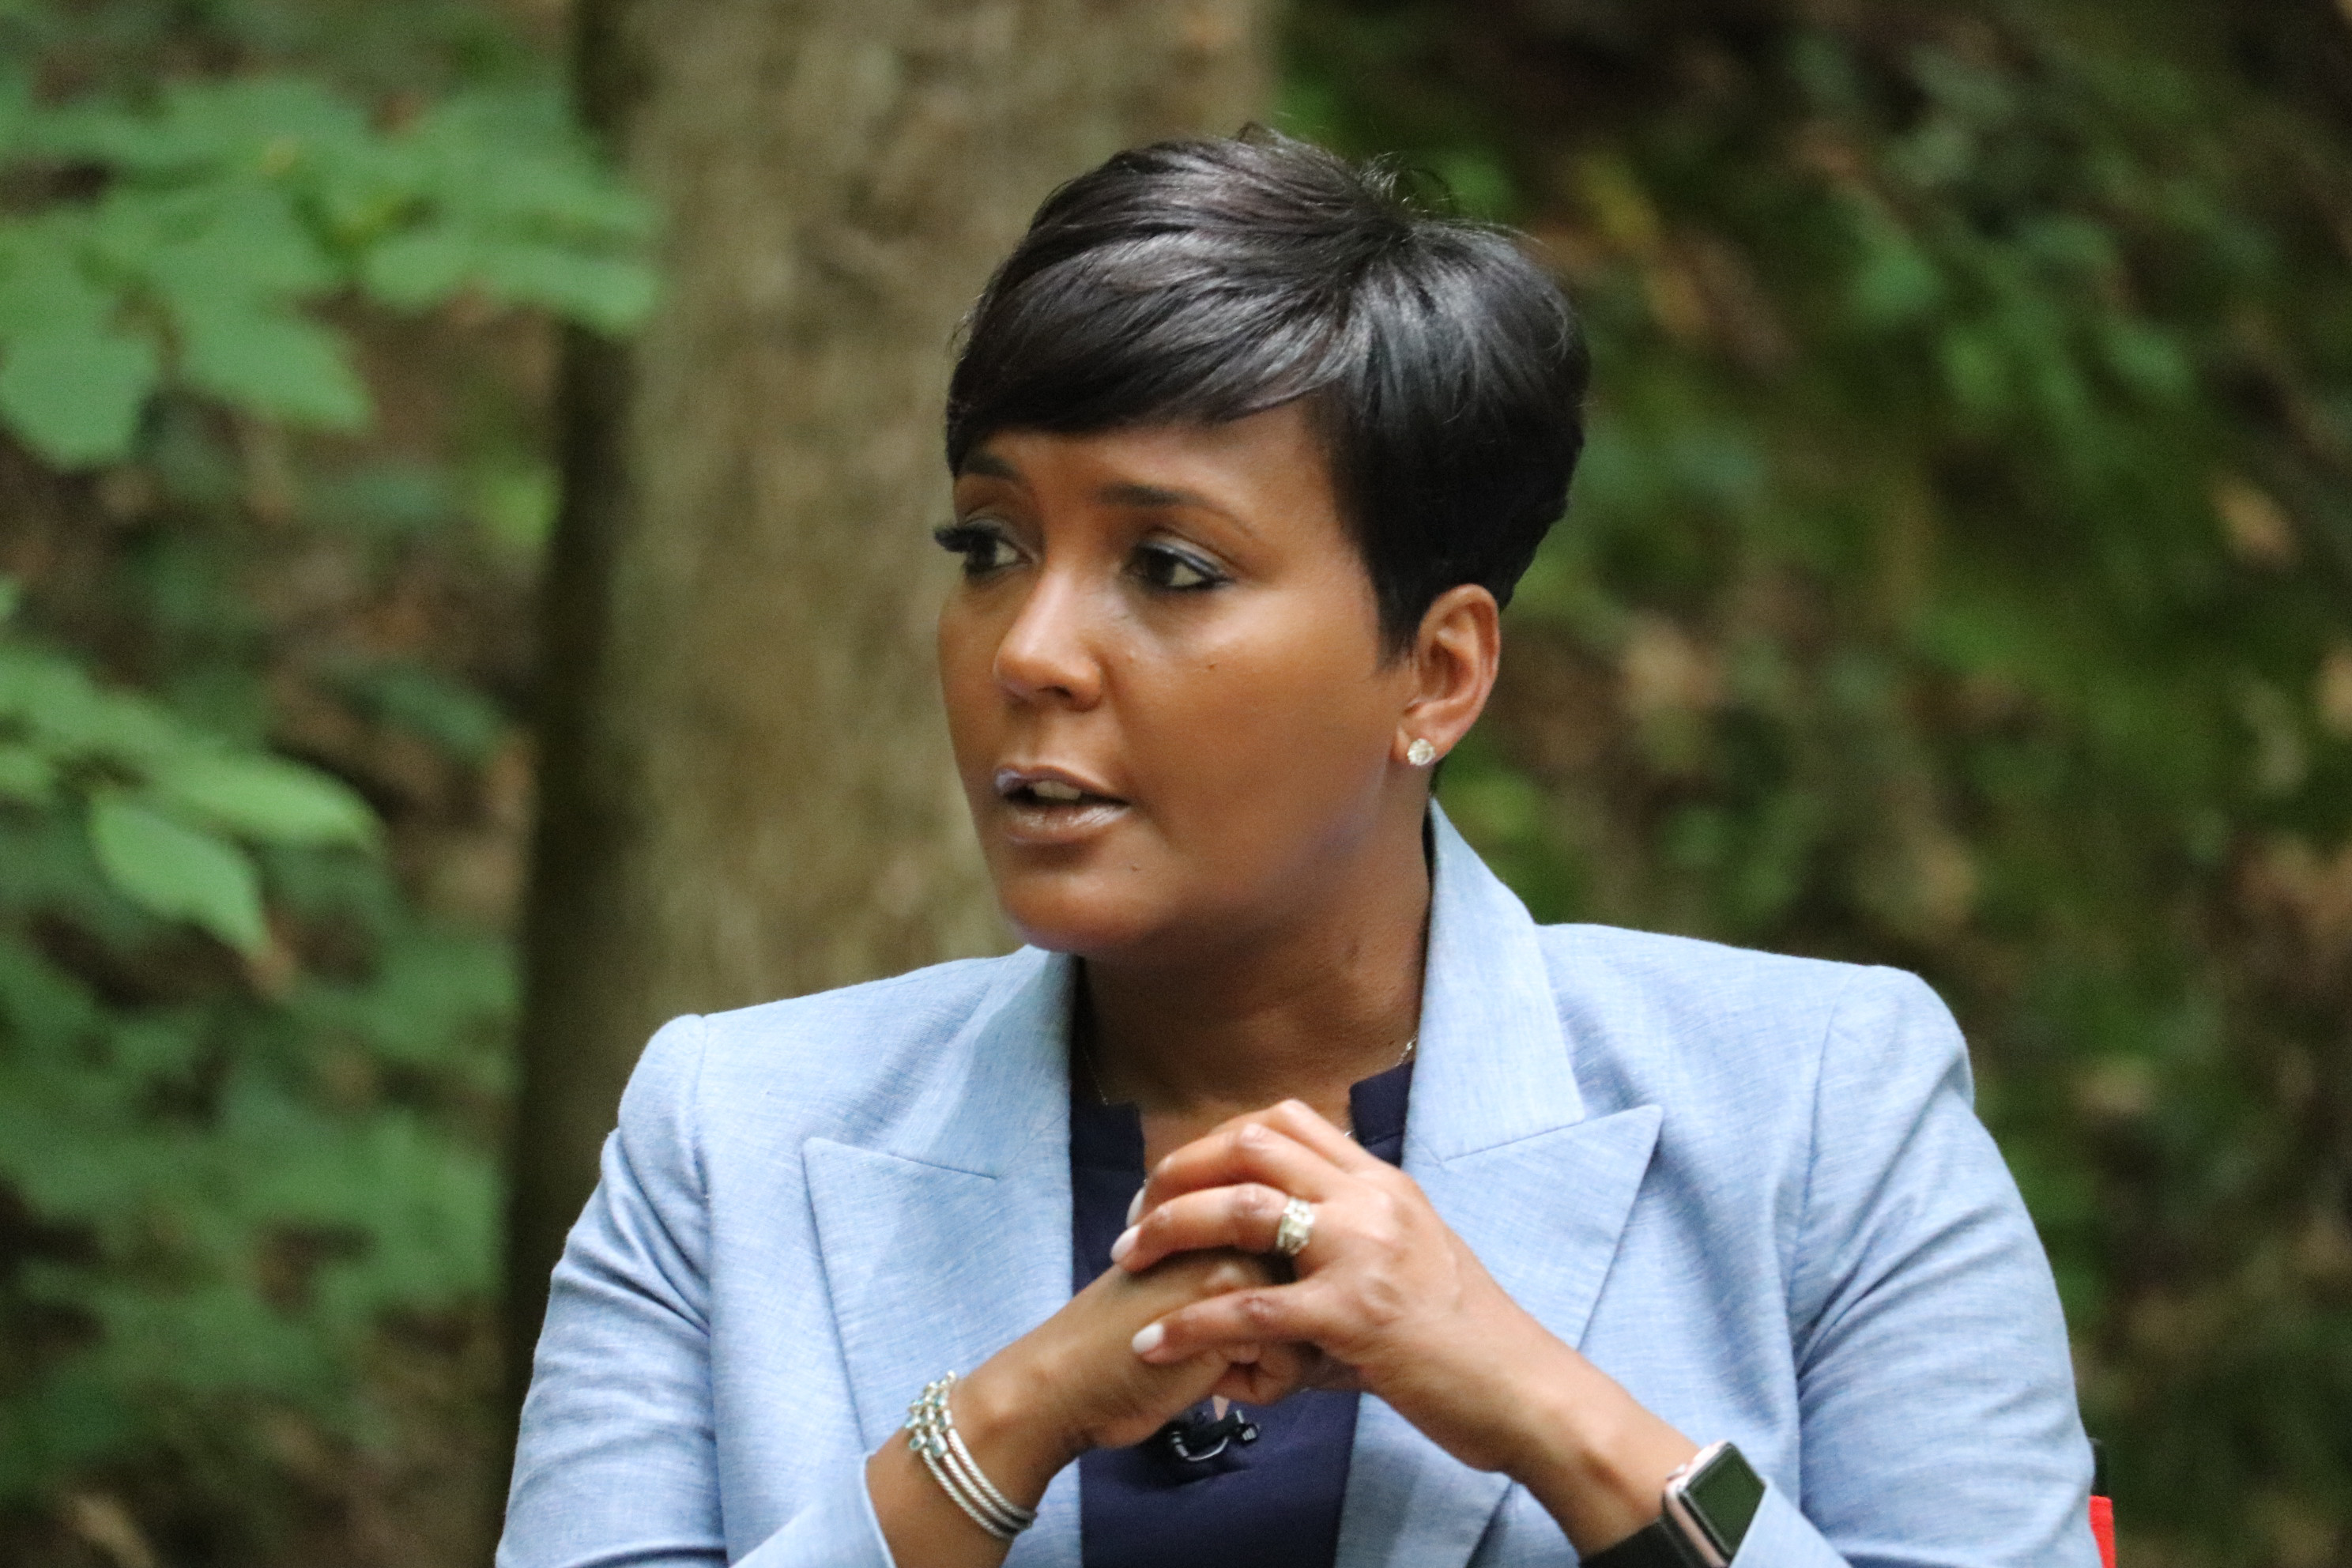 Keisha Lance Bottoms is Atlanta’s 6oth mayor and the second Black woman to lead the city. (Jaime Green/WABE)